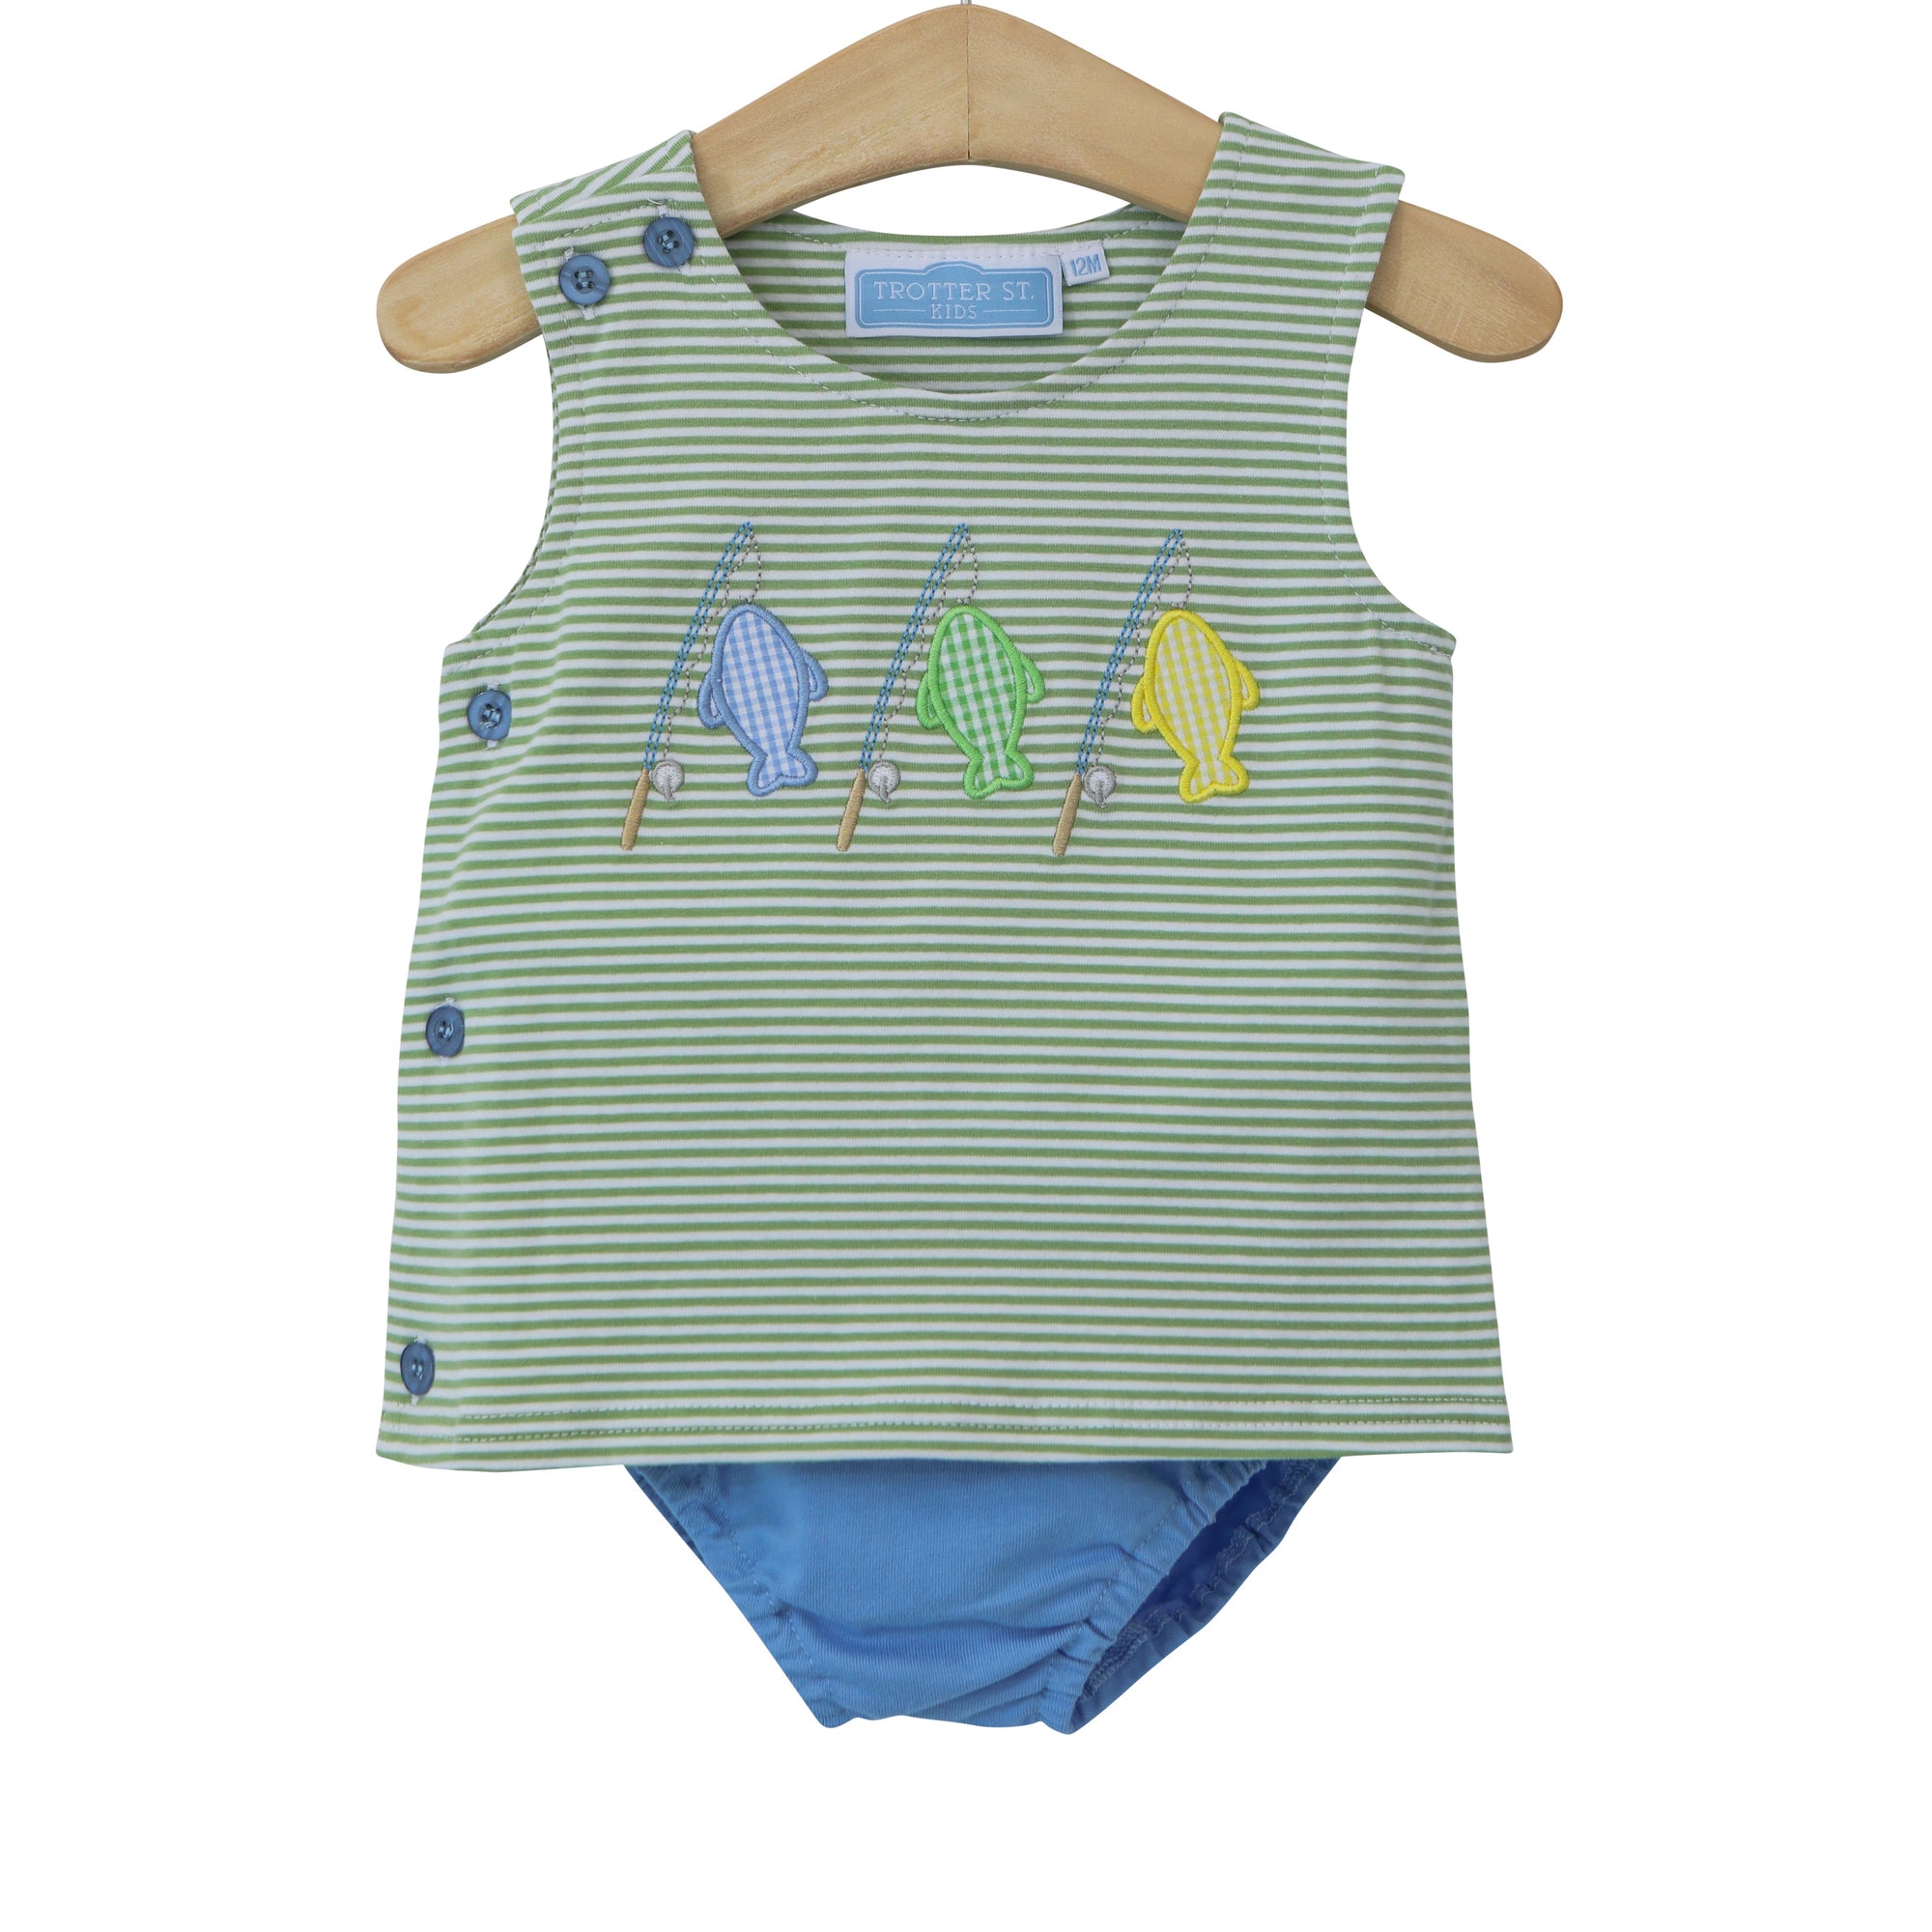 Hooked on Fishing Appliqued Diaper Set